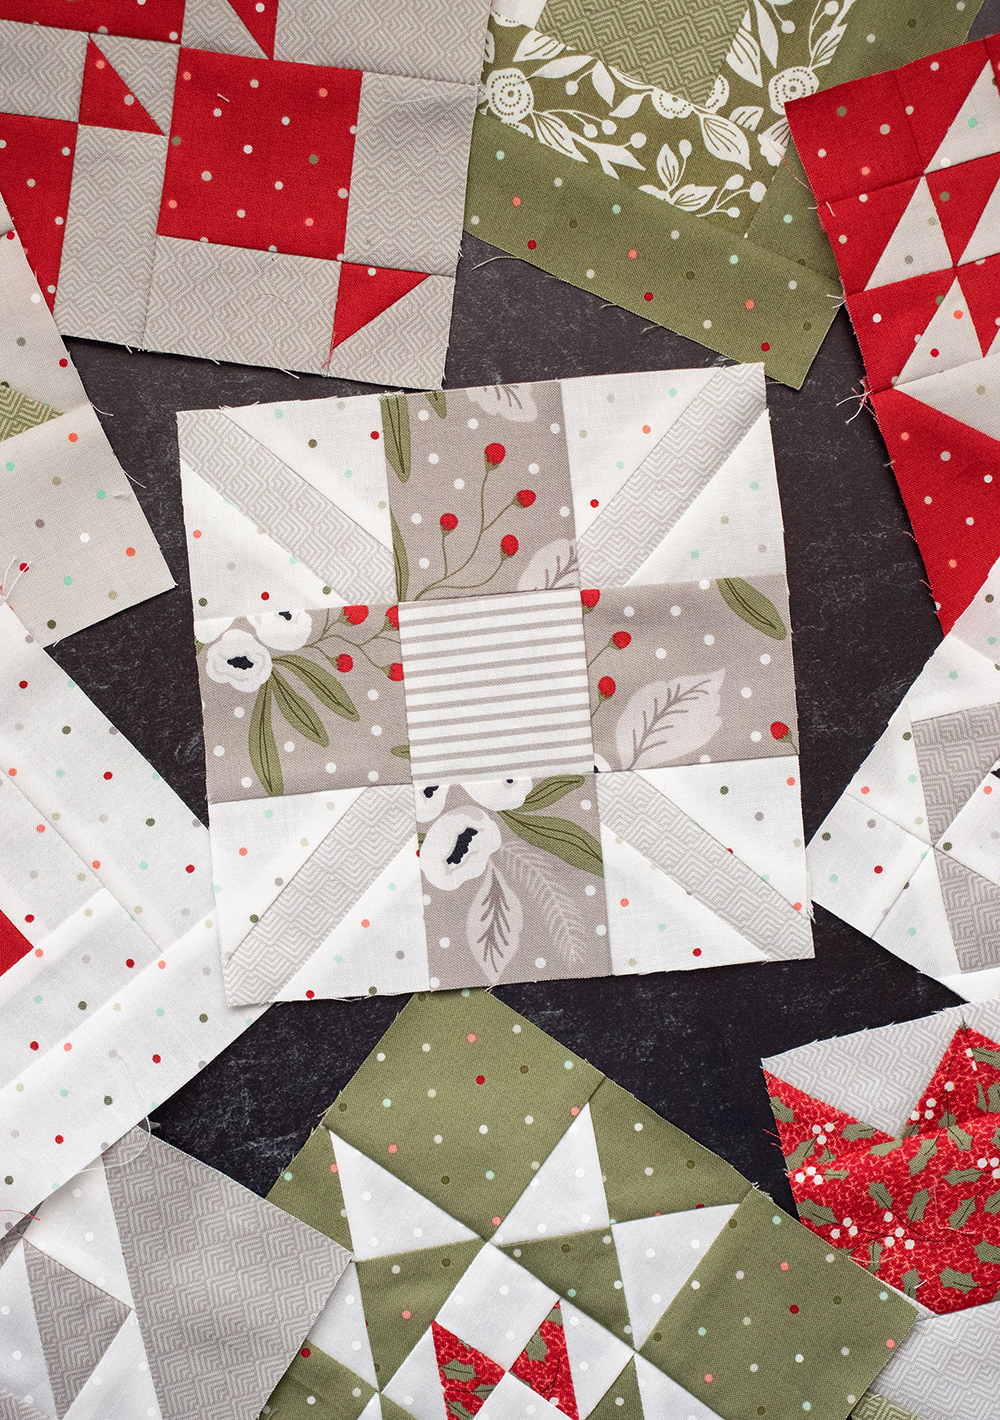 Sewcialites Quilt Along: Free Block of the Week. Block 10 is "Sincere" by April Rosenthal. Fabric is Christmas Morning by Lella Boutique.